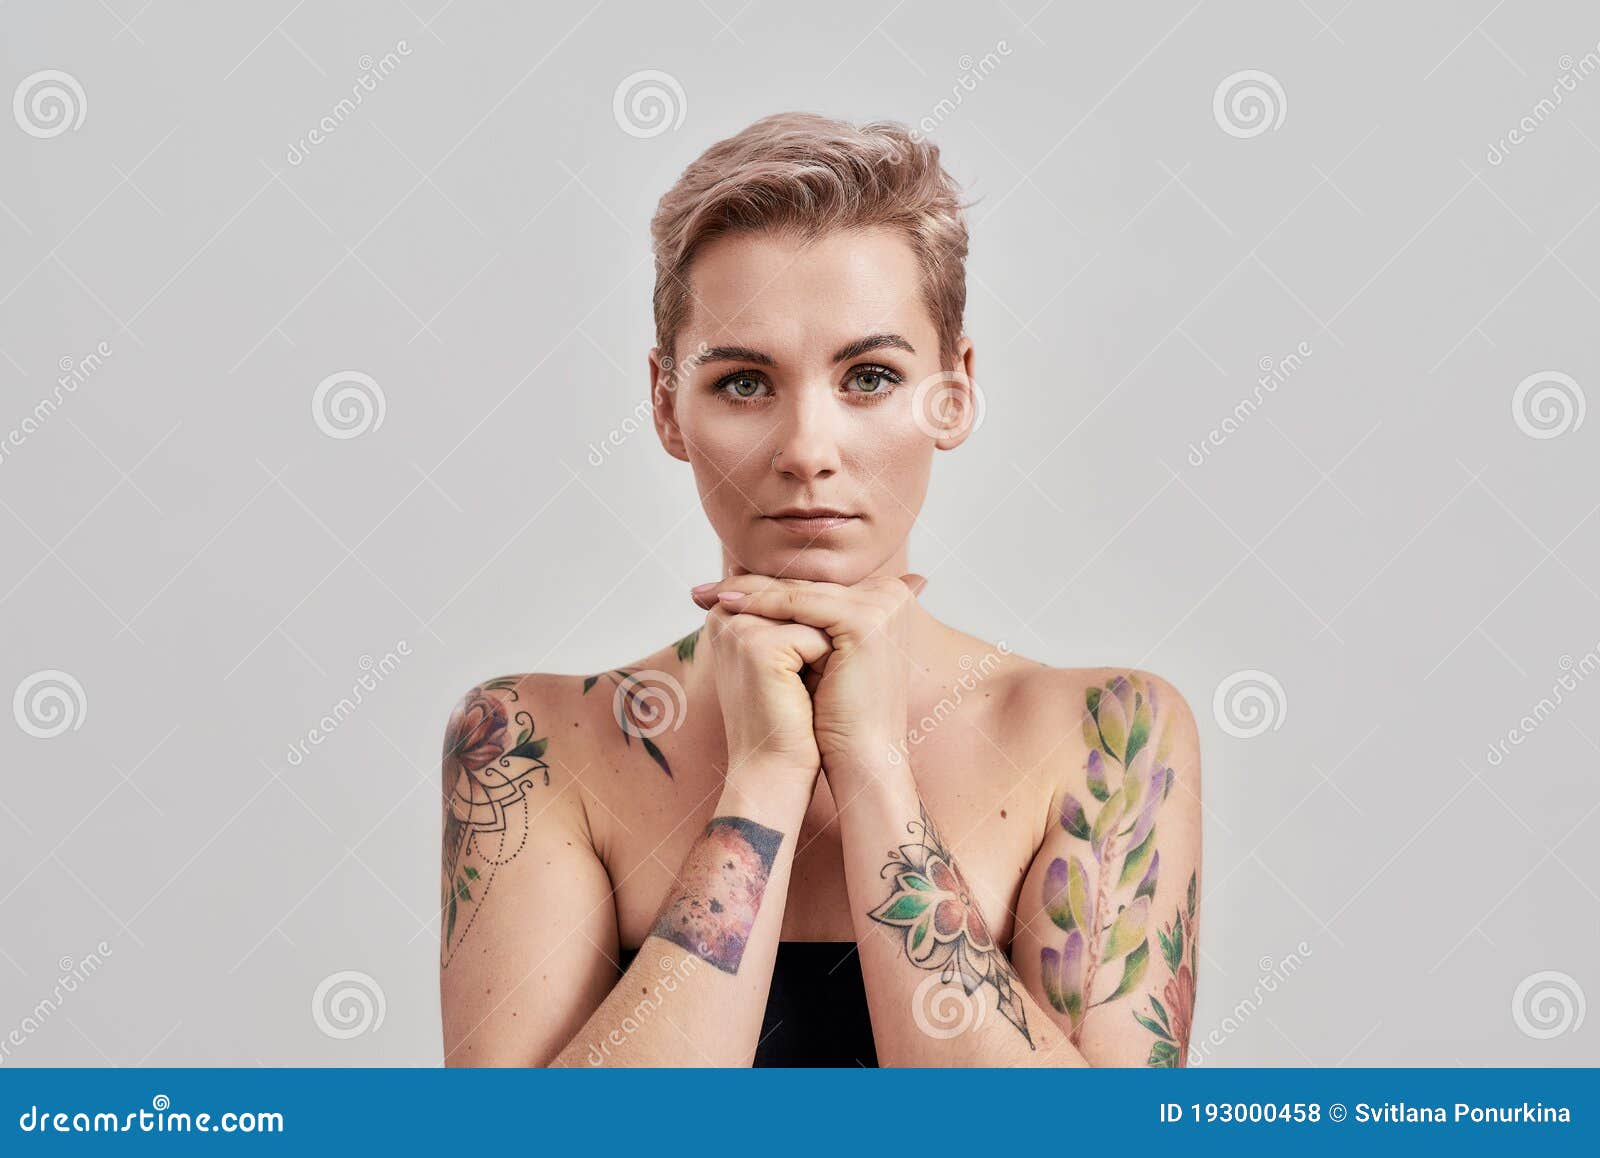 Well Portrait Of A Young Attractive Half Naked Tattooed 